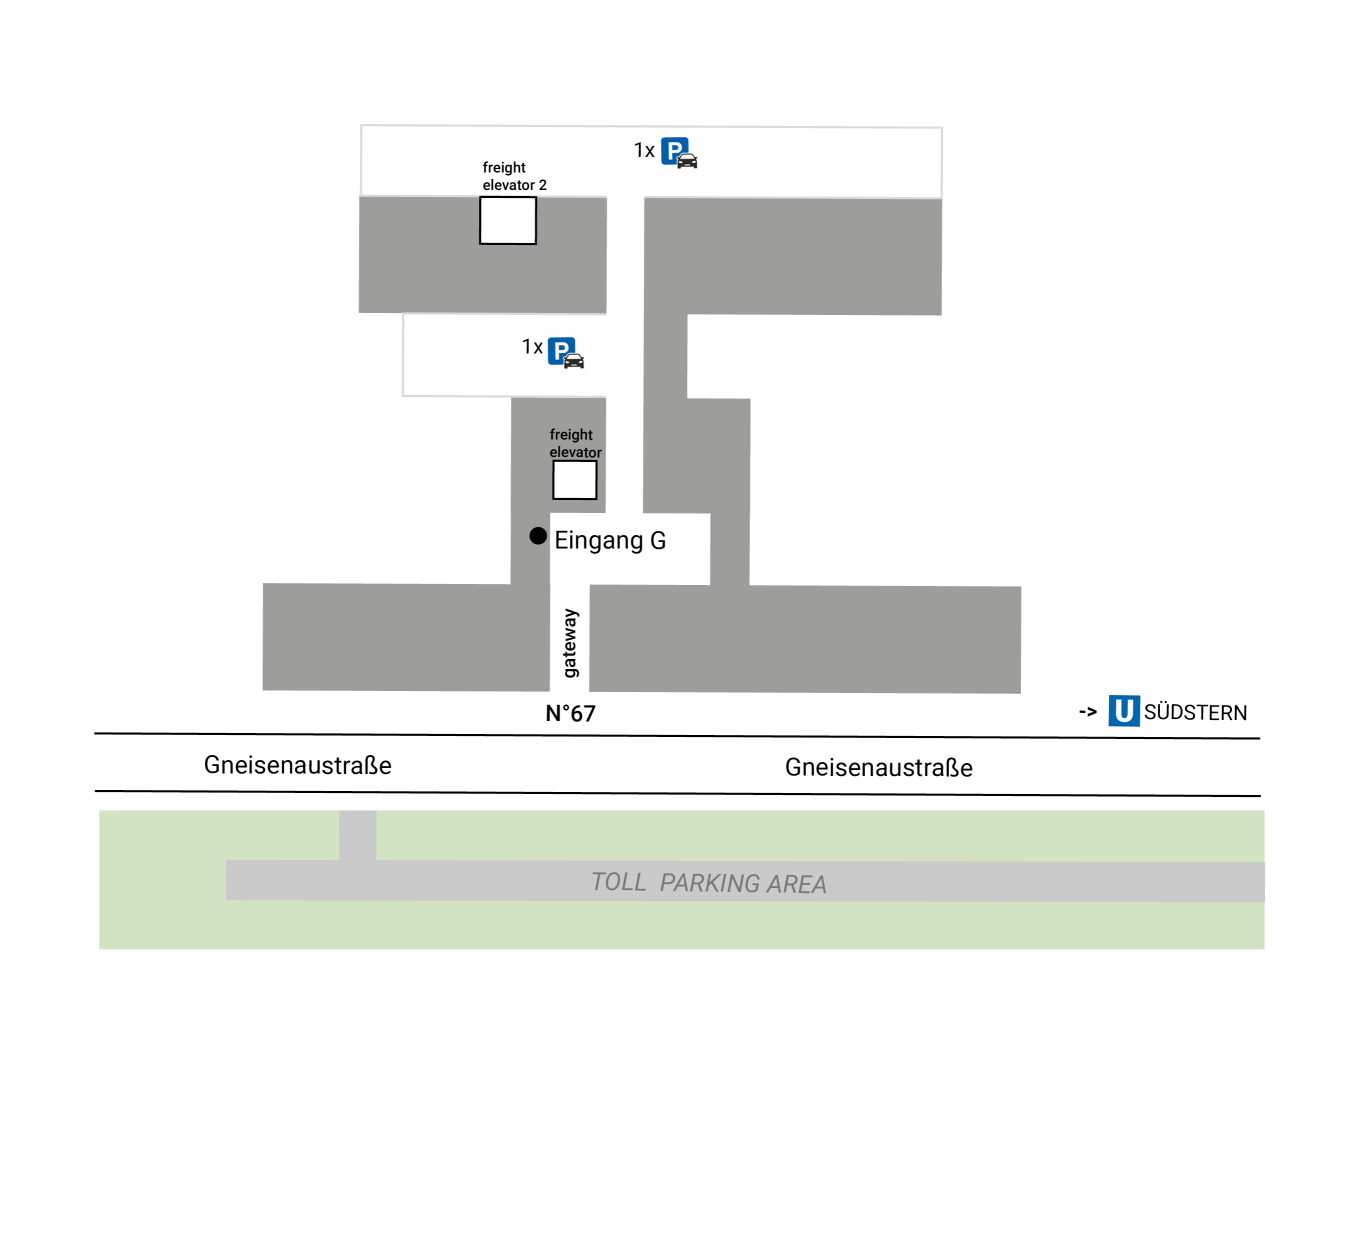 Here is the access map to the photo and film studio as well as the location of its two lifts and two parking spaces in the heart of Berlin-Kreuzberg